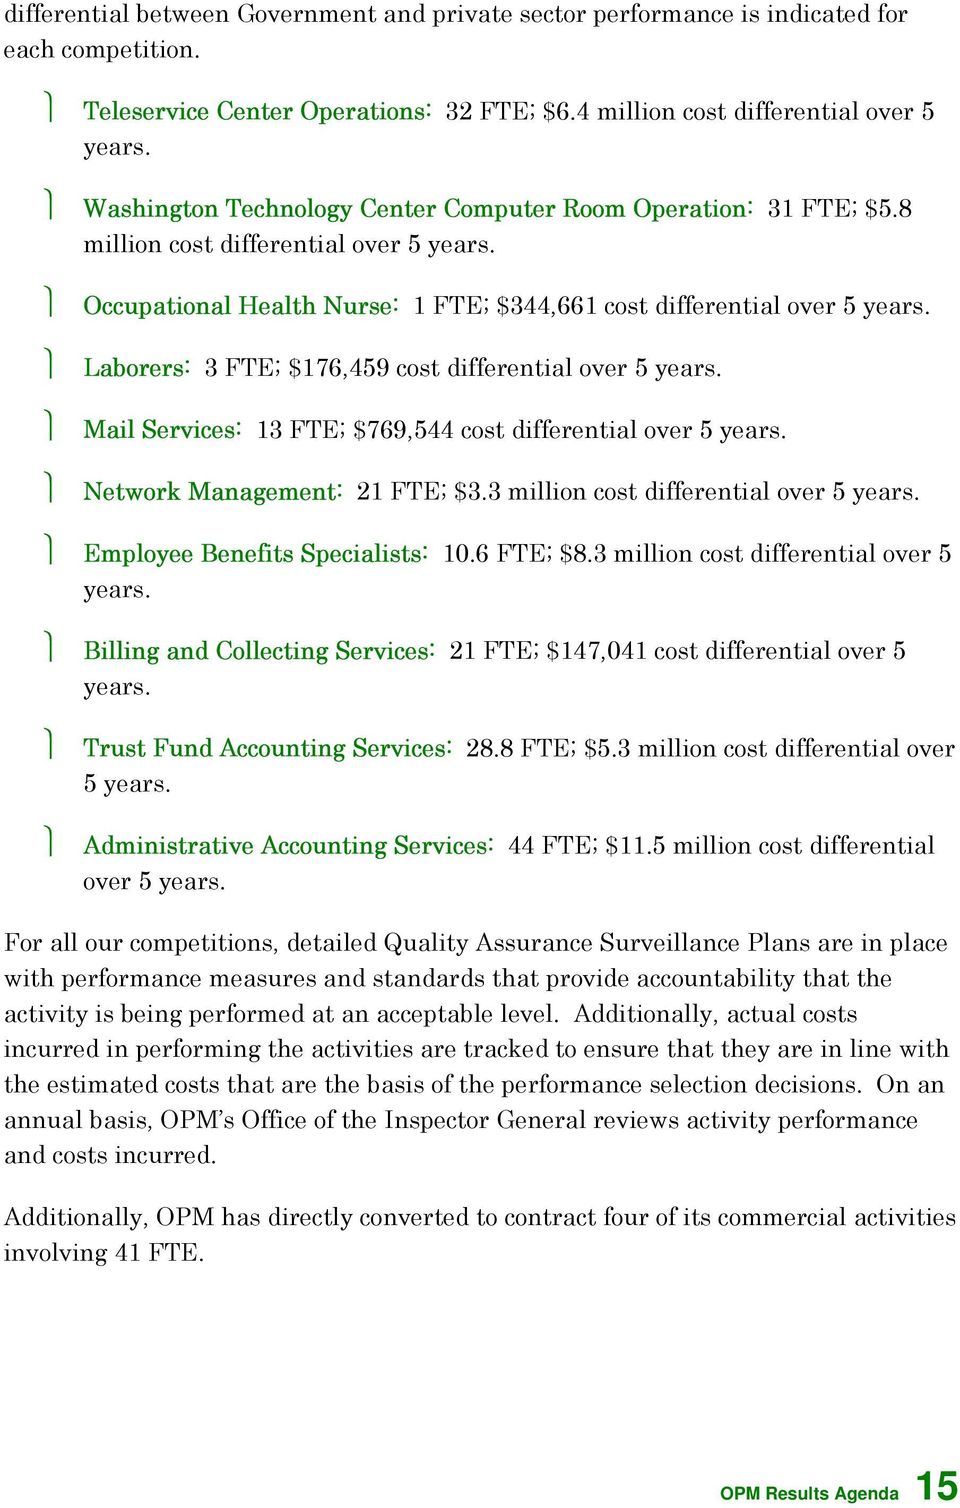 Laborers: 3 FTE; $176,459 cost differential over 5 years. Mail Services: 13 FTE; $769,544 cost differential over 5 years. Network Management: 21 FTE; $3.3 million cost differential over 5 years.